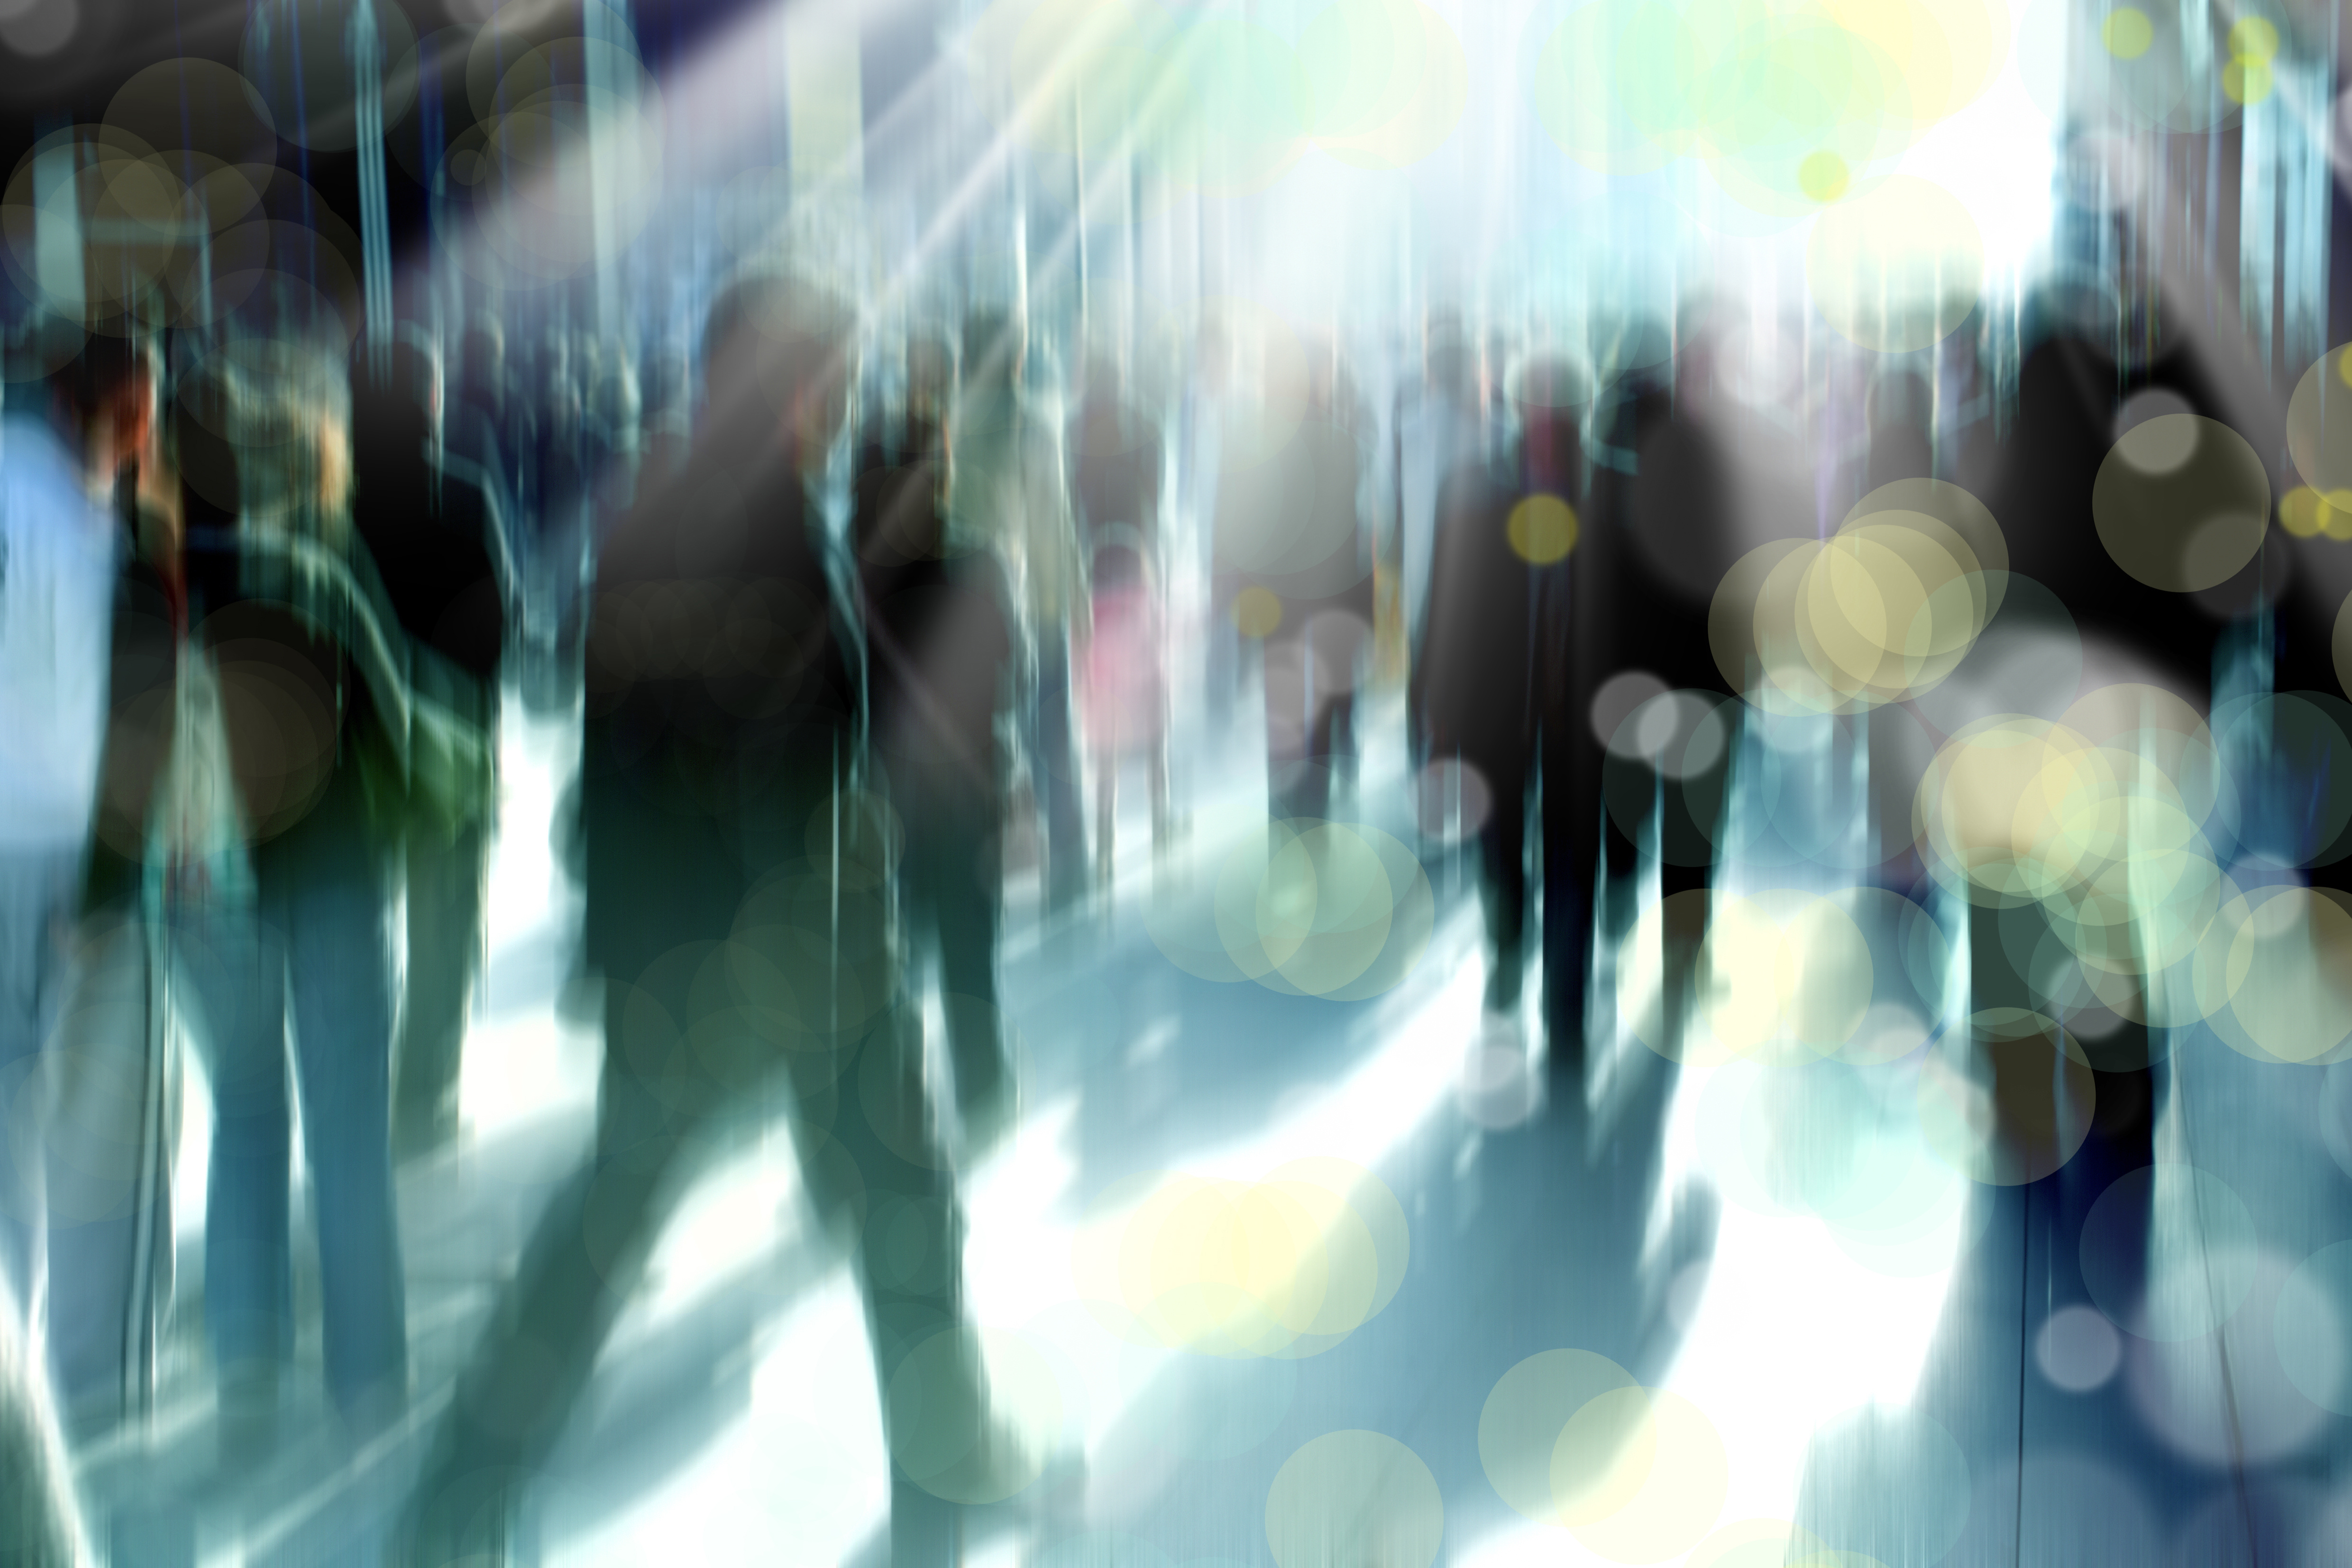 blurry background image of people walking on busy street